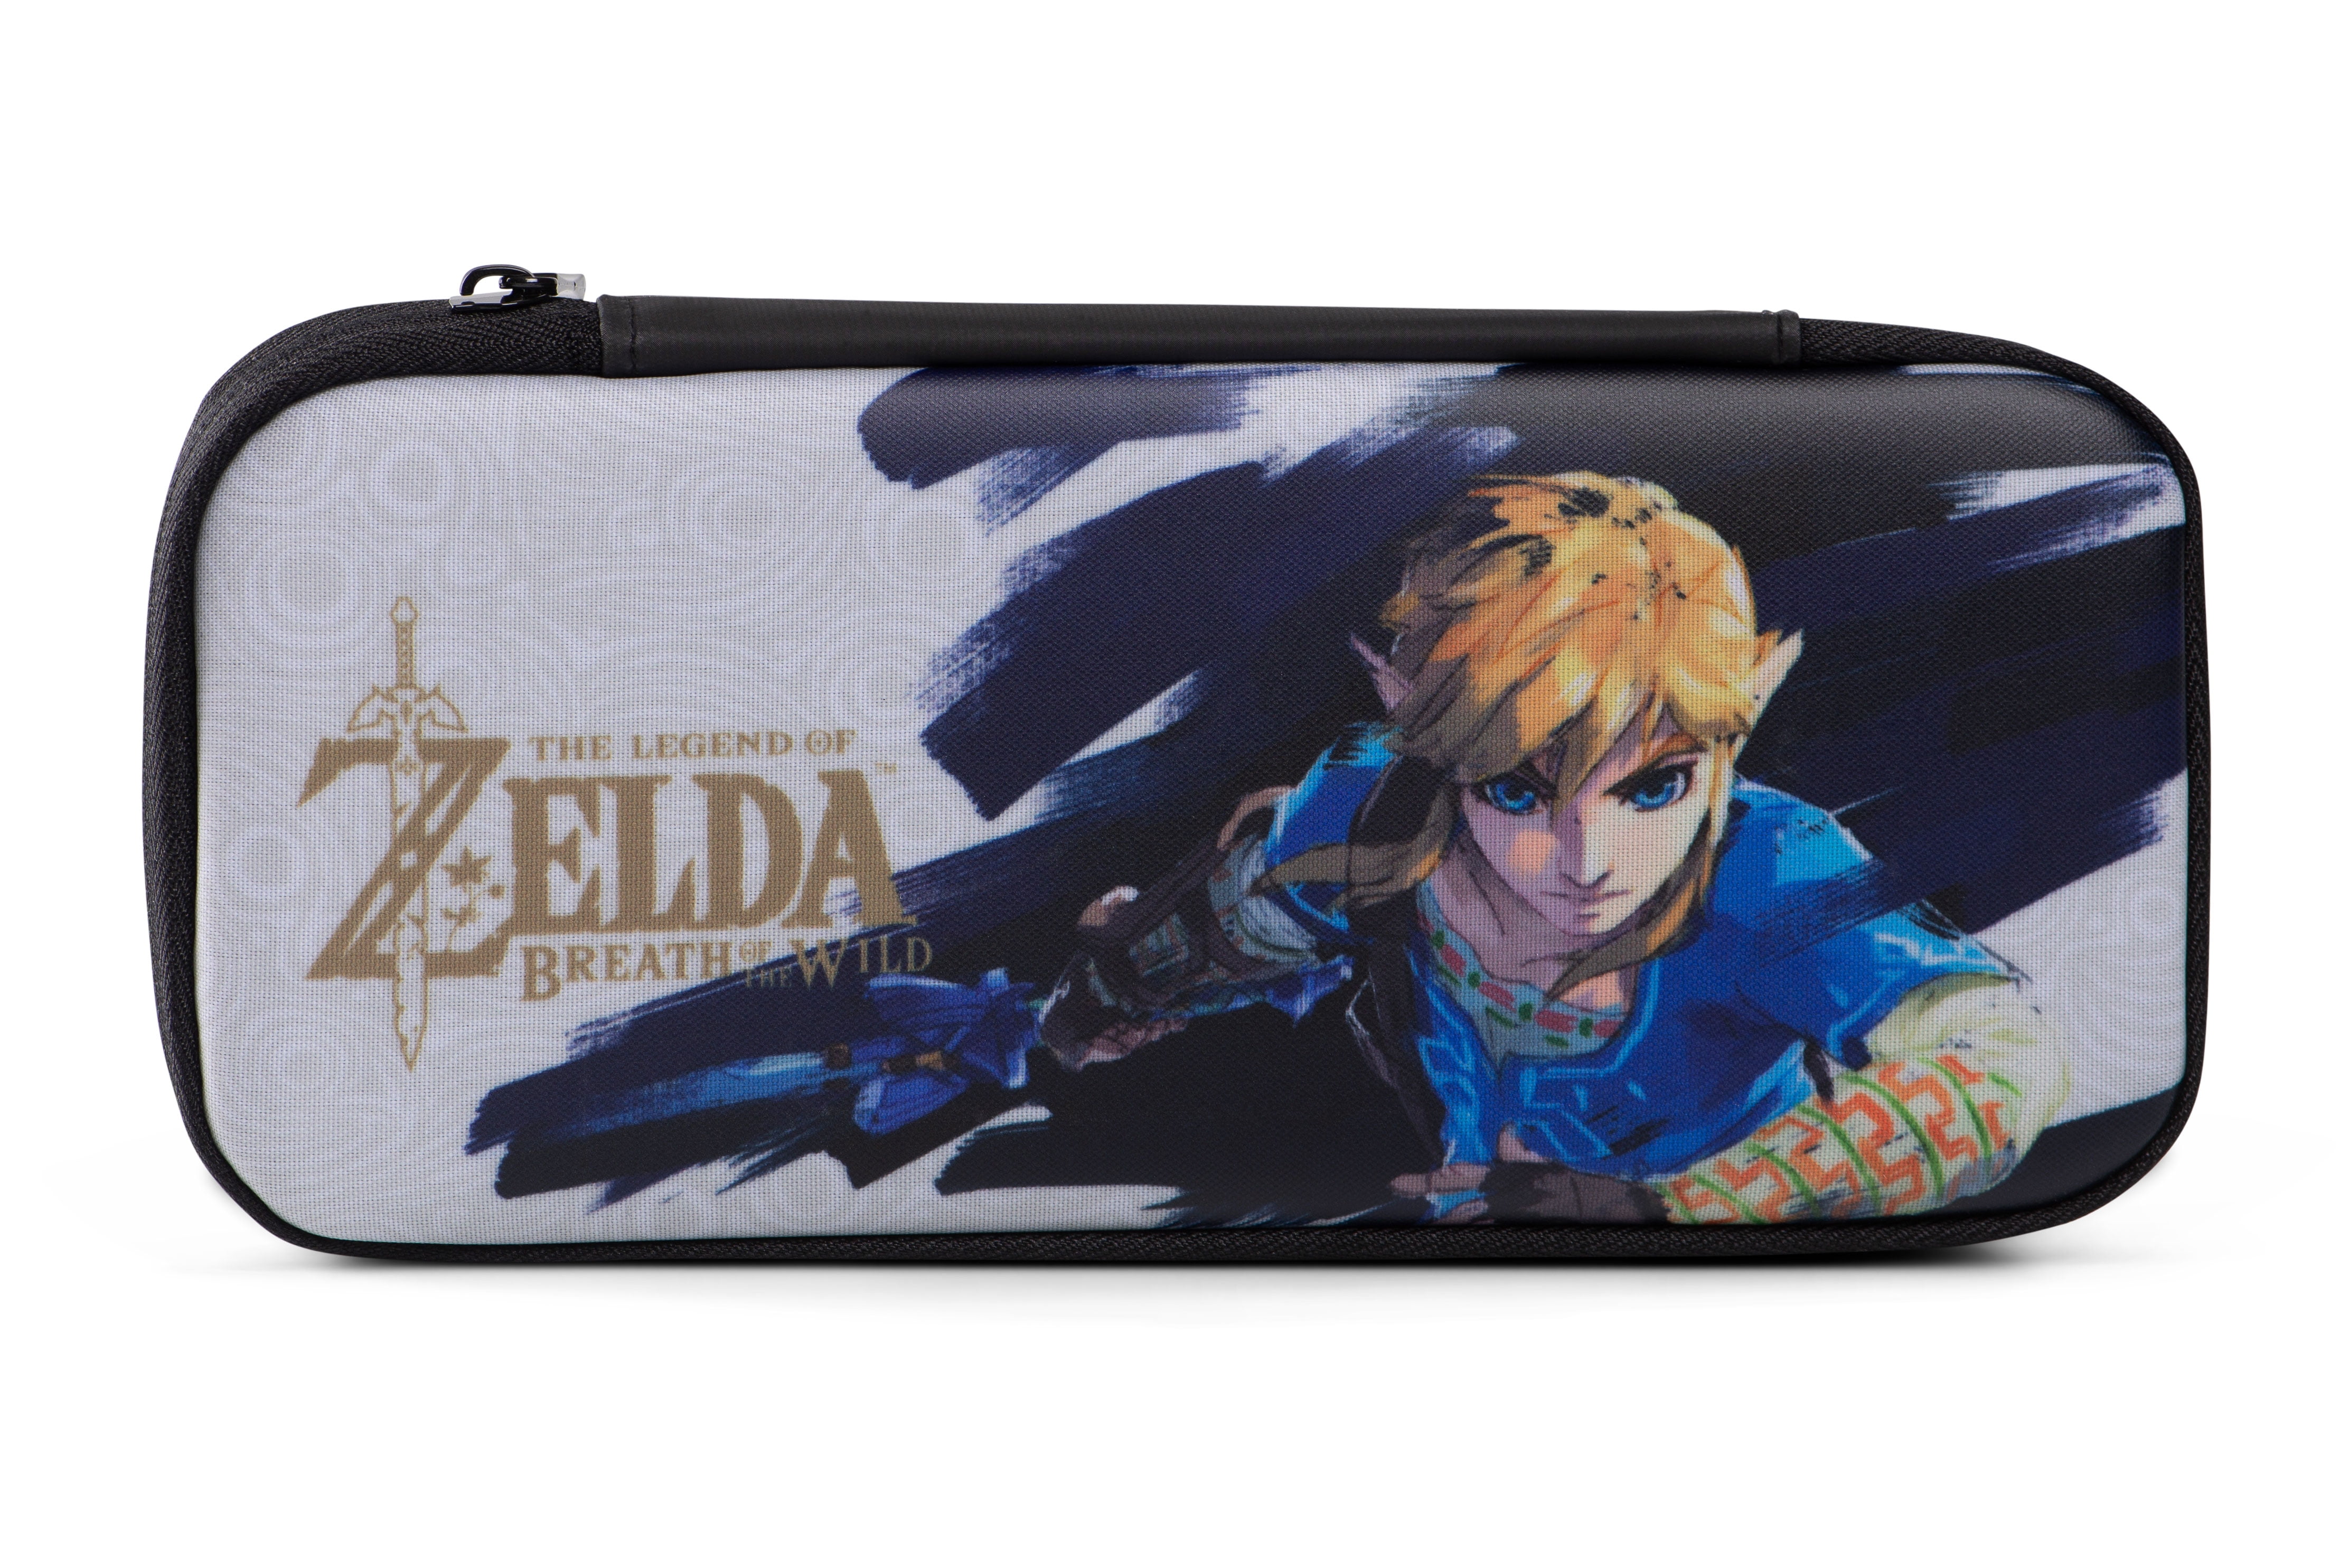 Switch and Joy Cons Sheikah Slate Eye Design Holds 12 Game Carts Legend of Zelda Carry Case For Nintendo Switch FASH DISPATCH